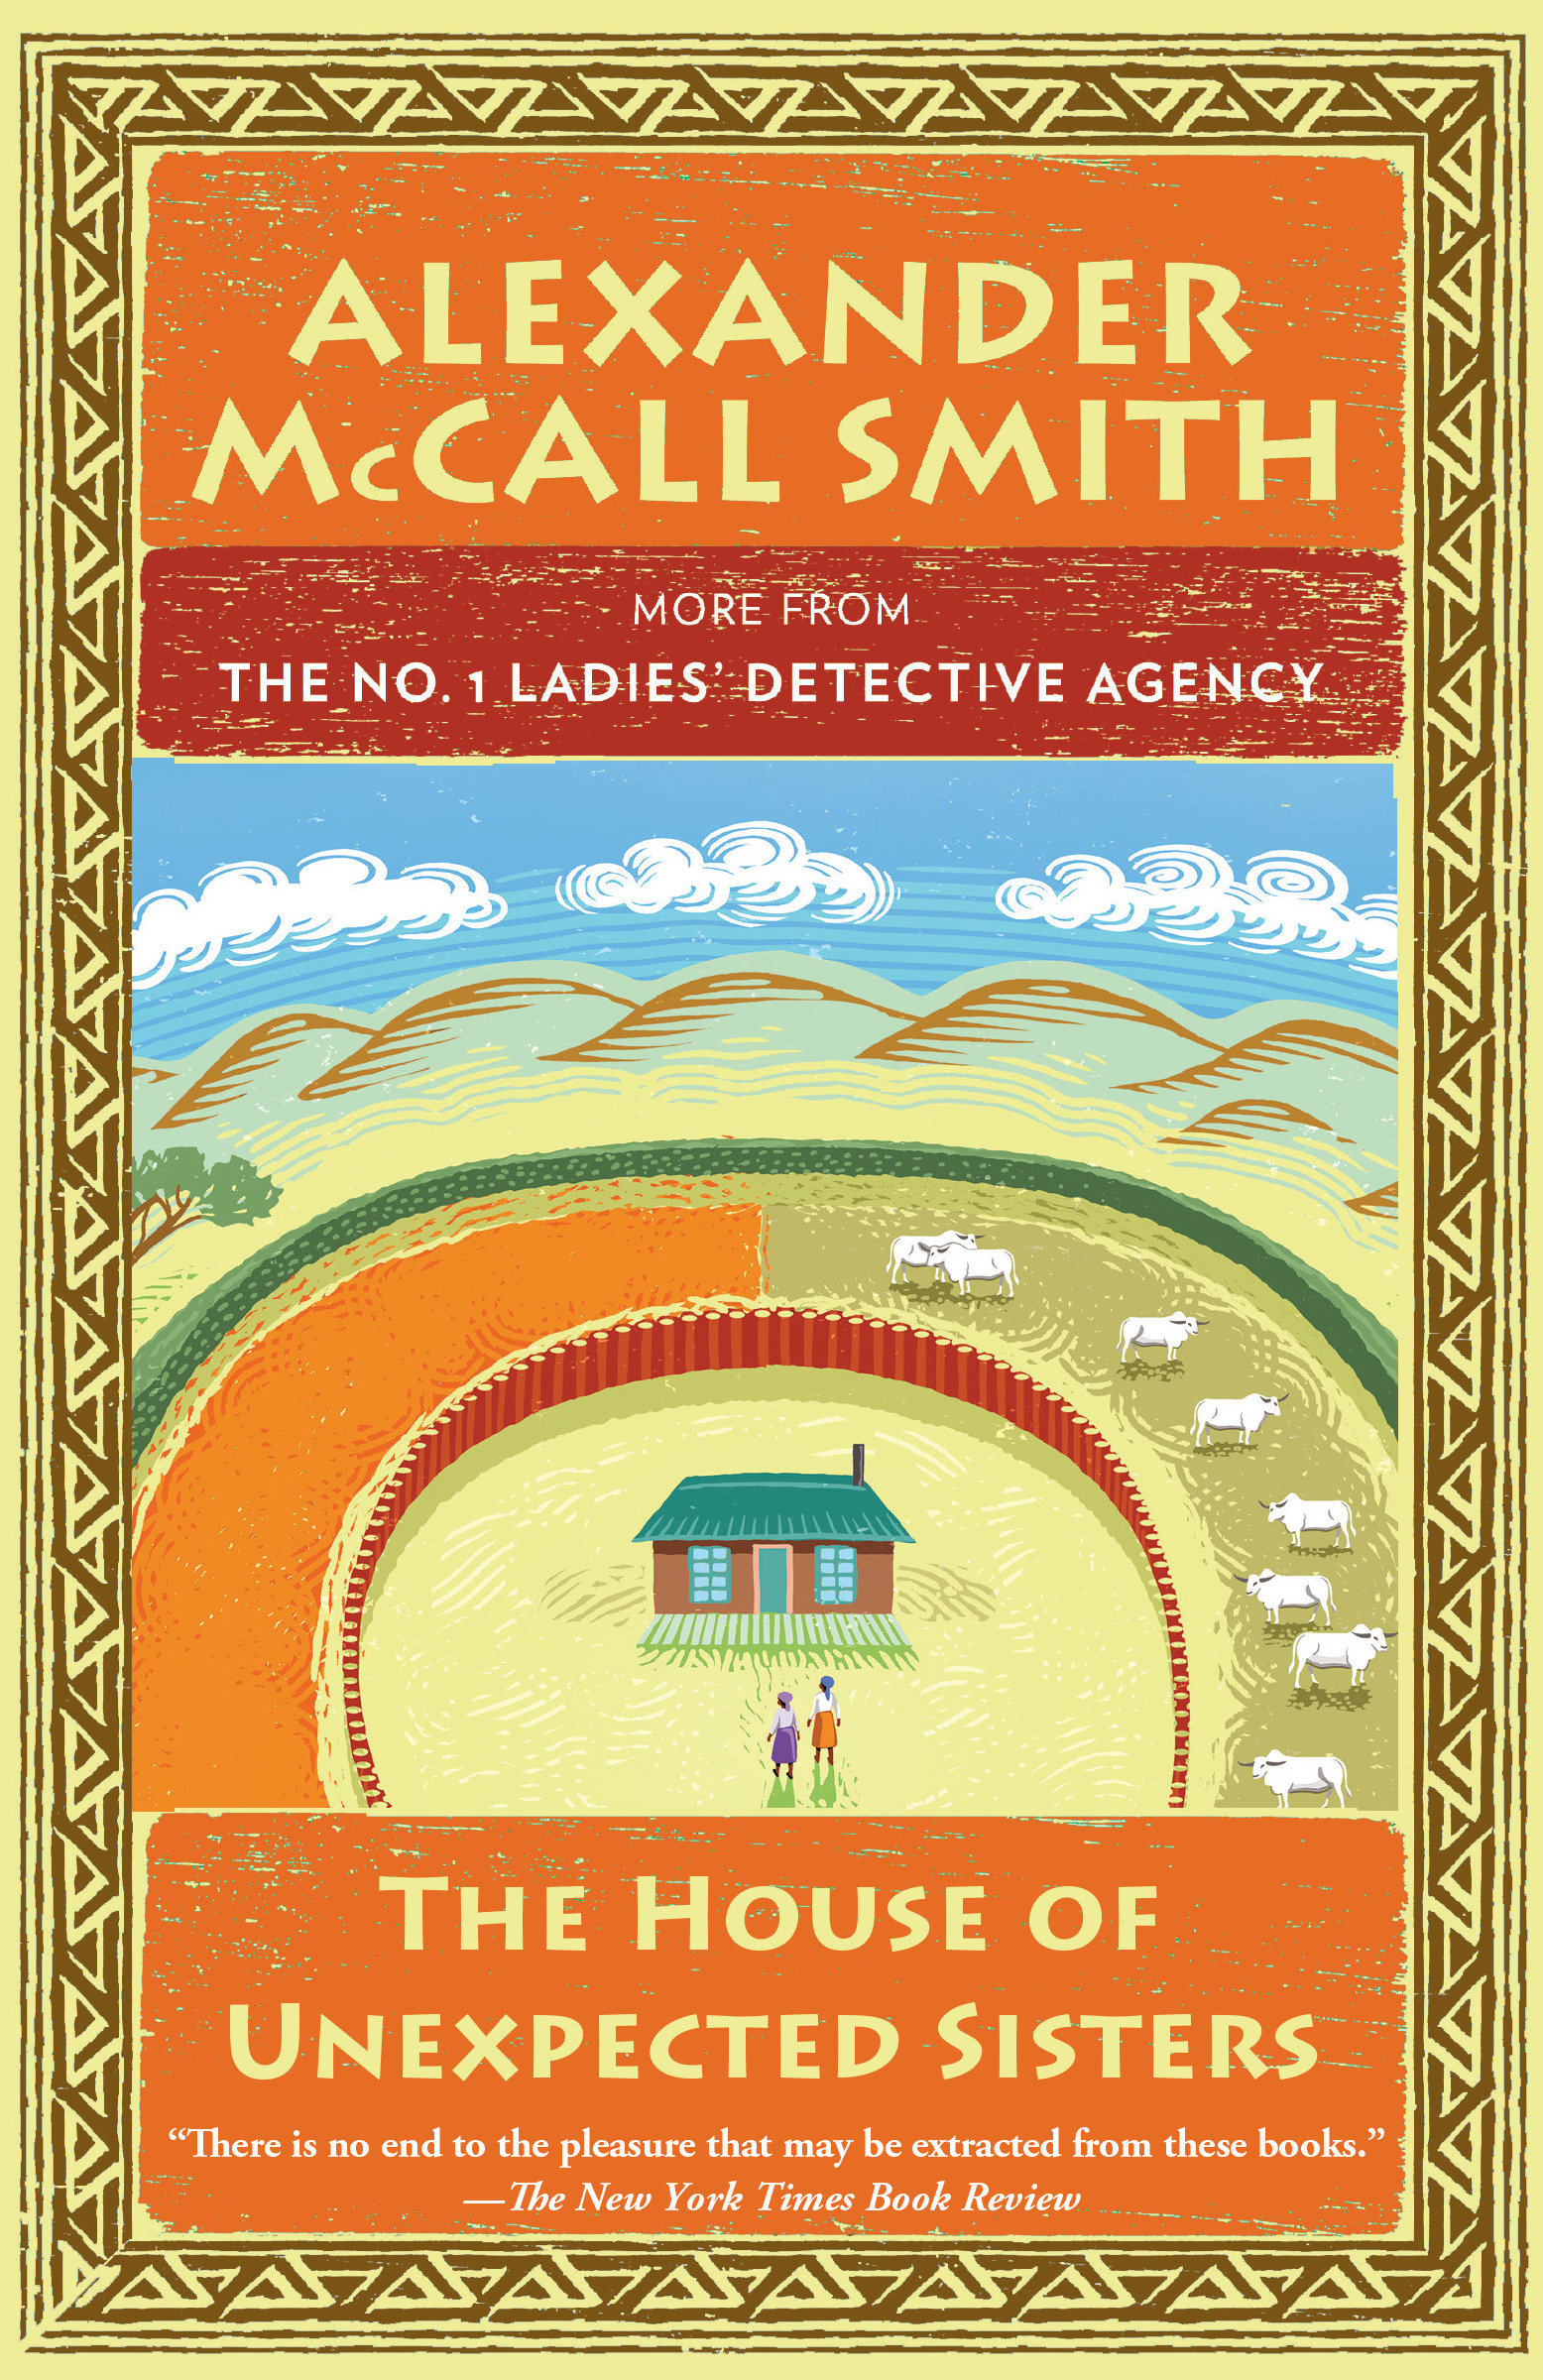 The house of unexpected sisters cover image